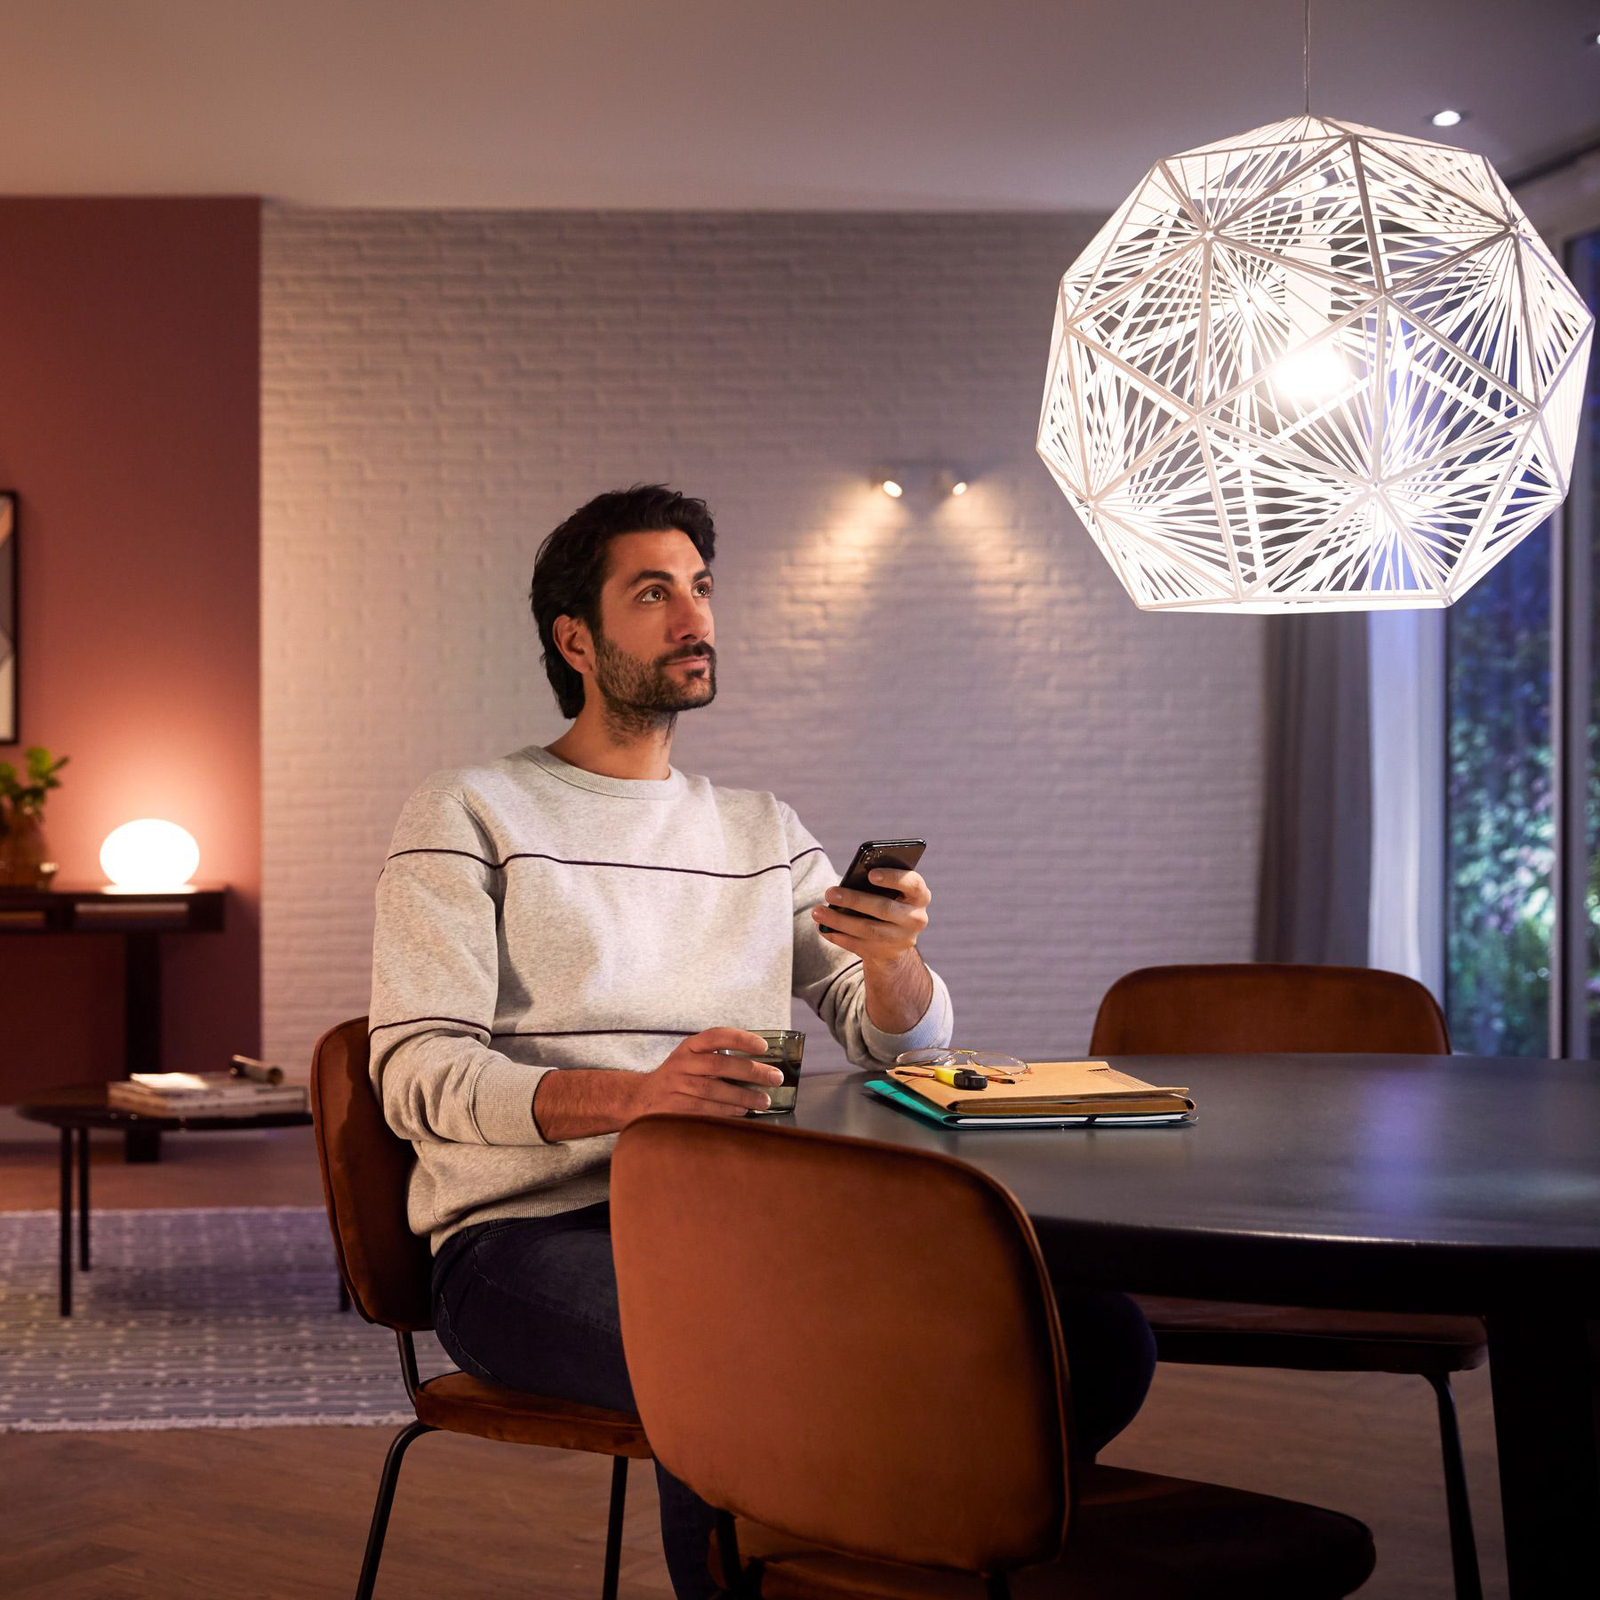 Philips Hue White&Color Ambiance E27 11W 1055lm 2er